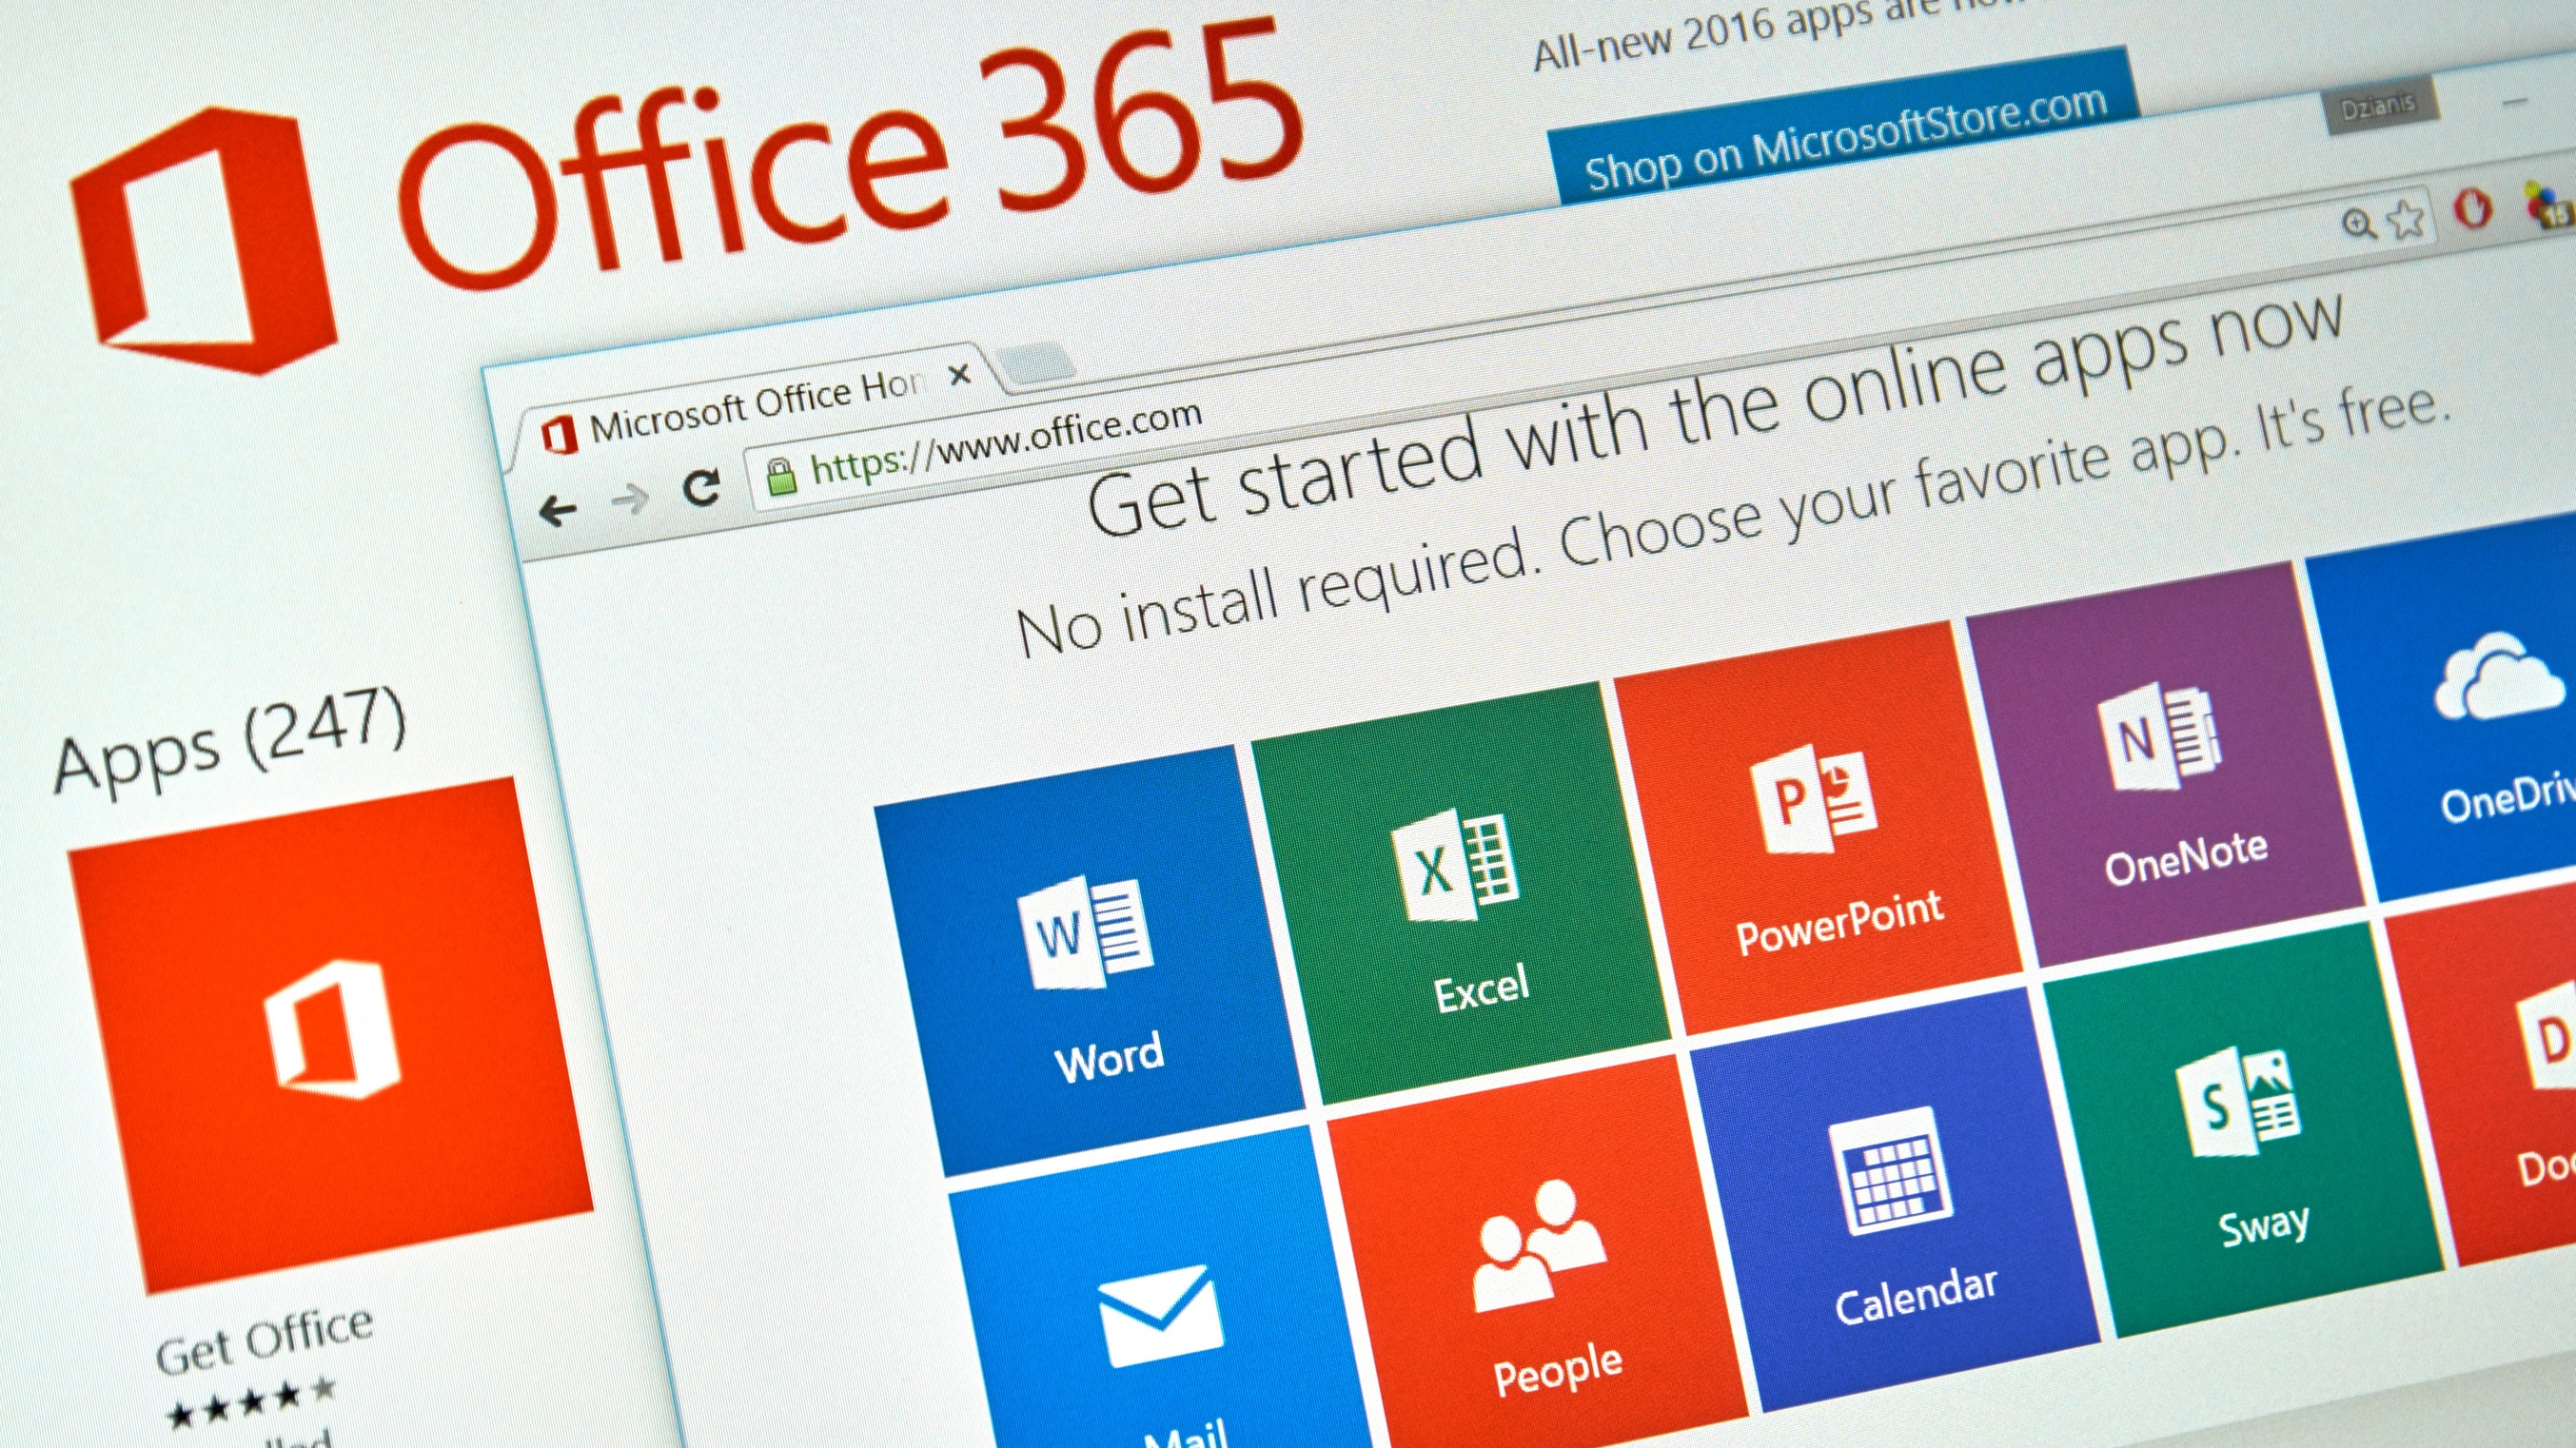 Filling the Gaps in Office 365